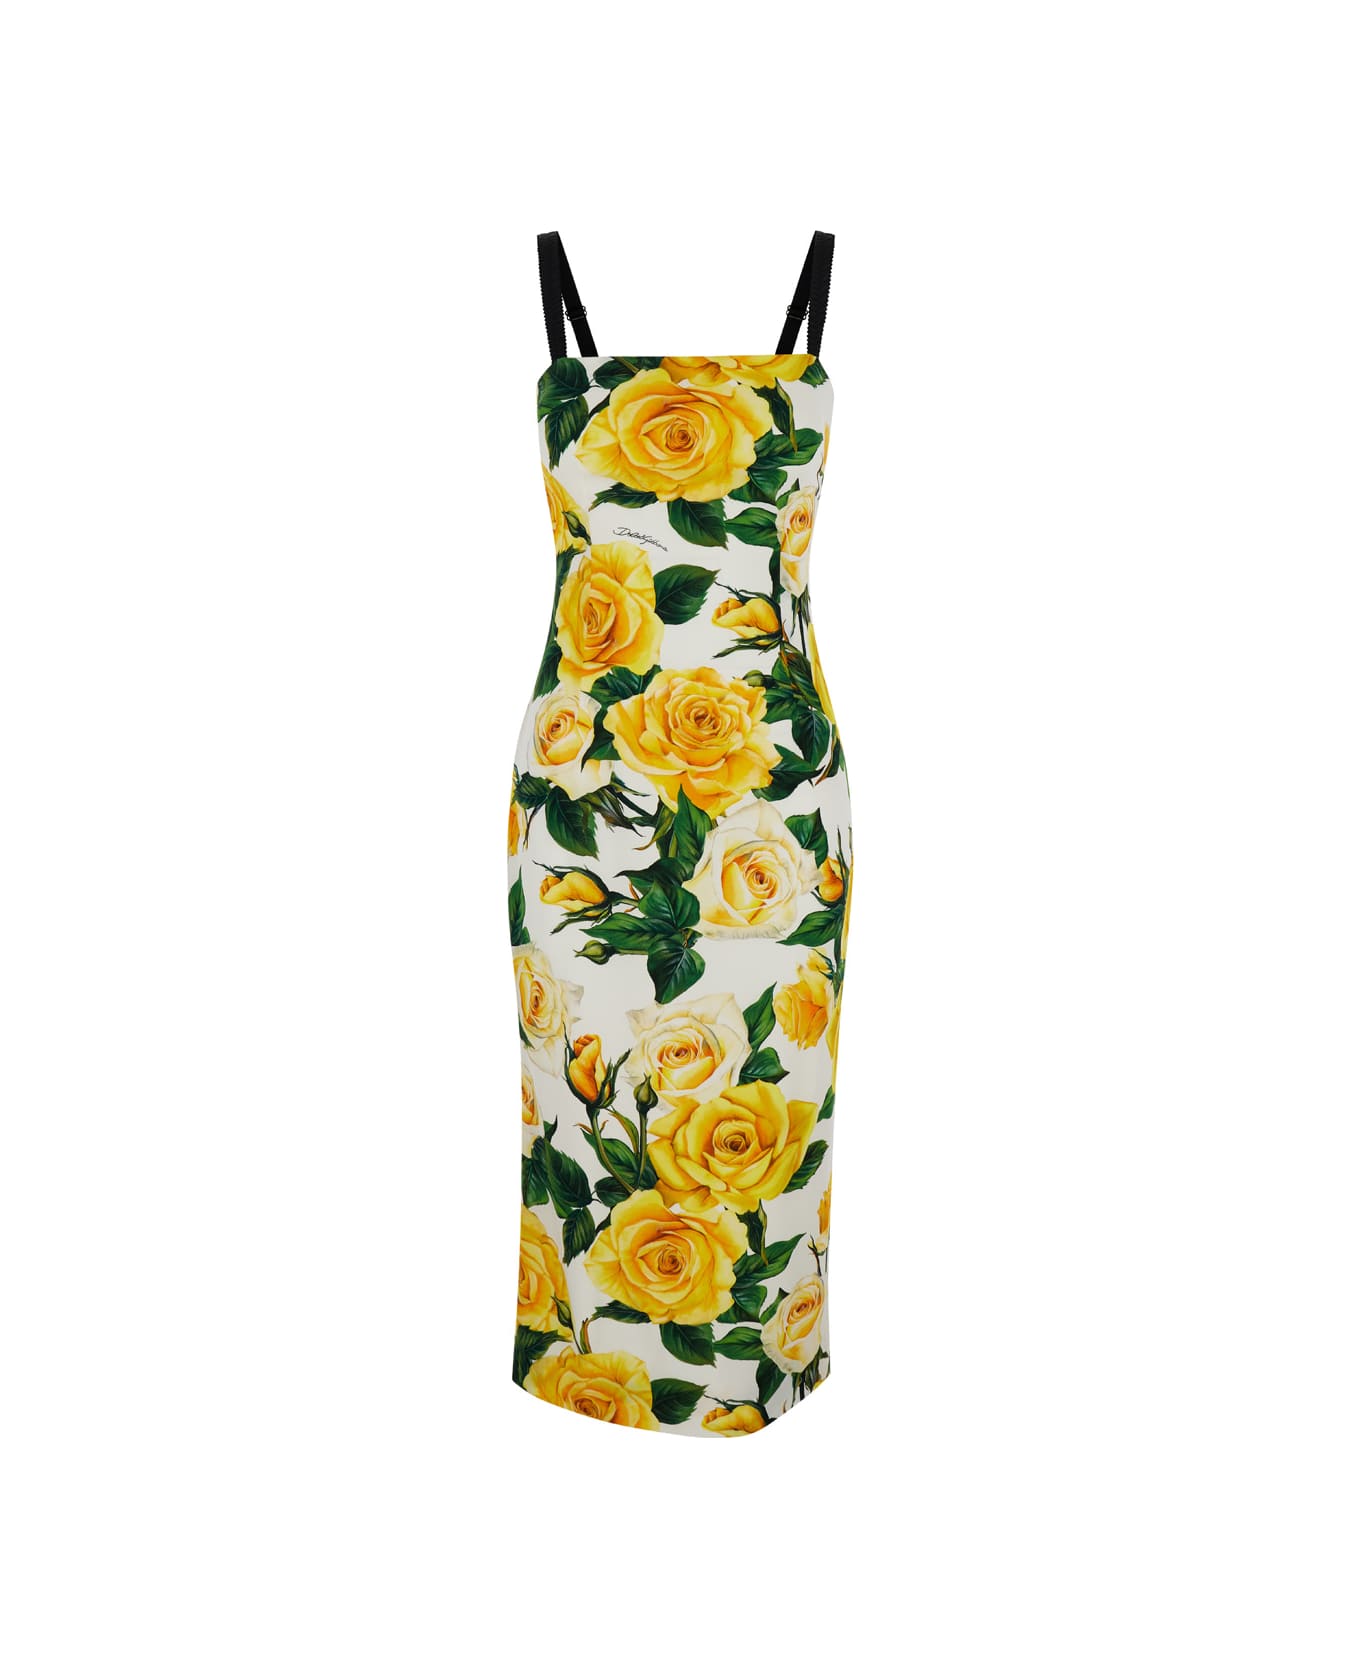 Dolce & Gabbana Midi Dress With All-over Flower Print - Rose gialle fdo bco